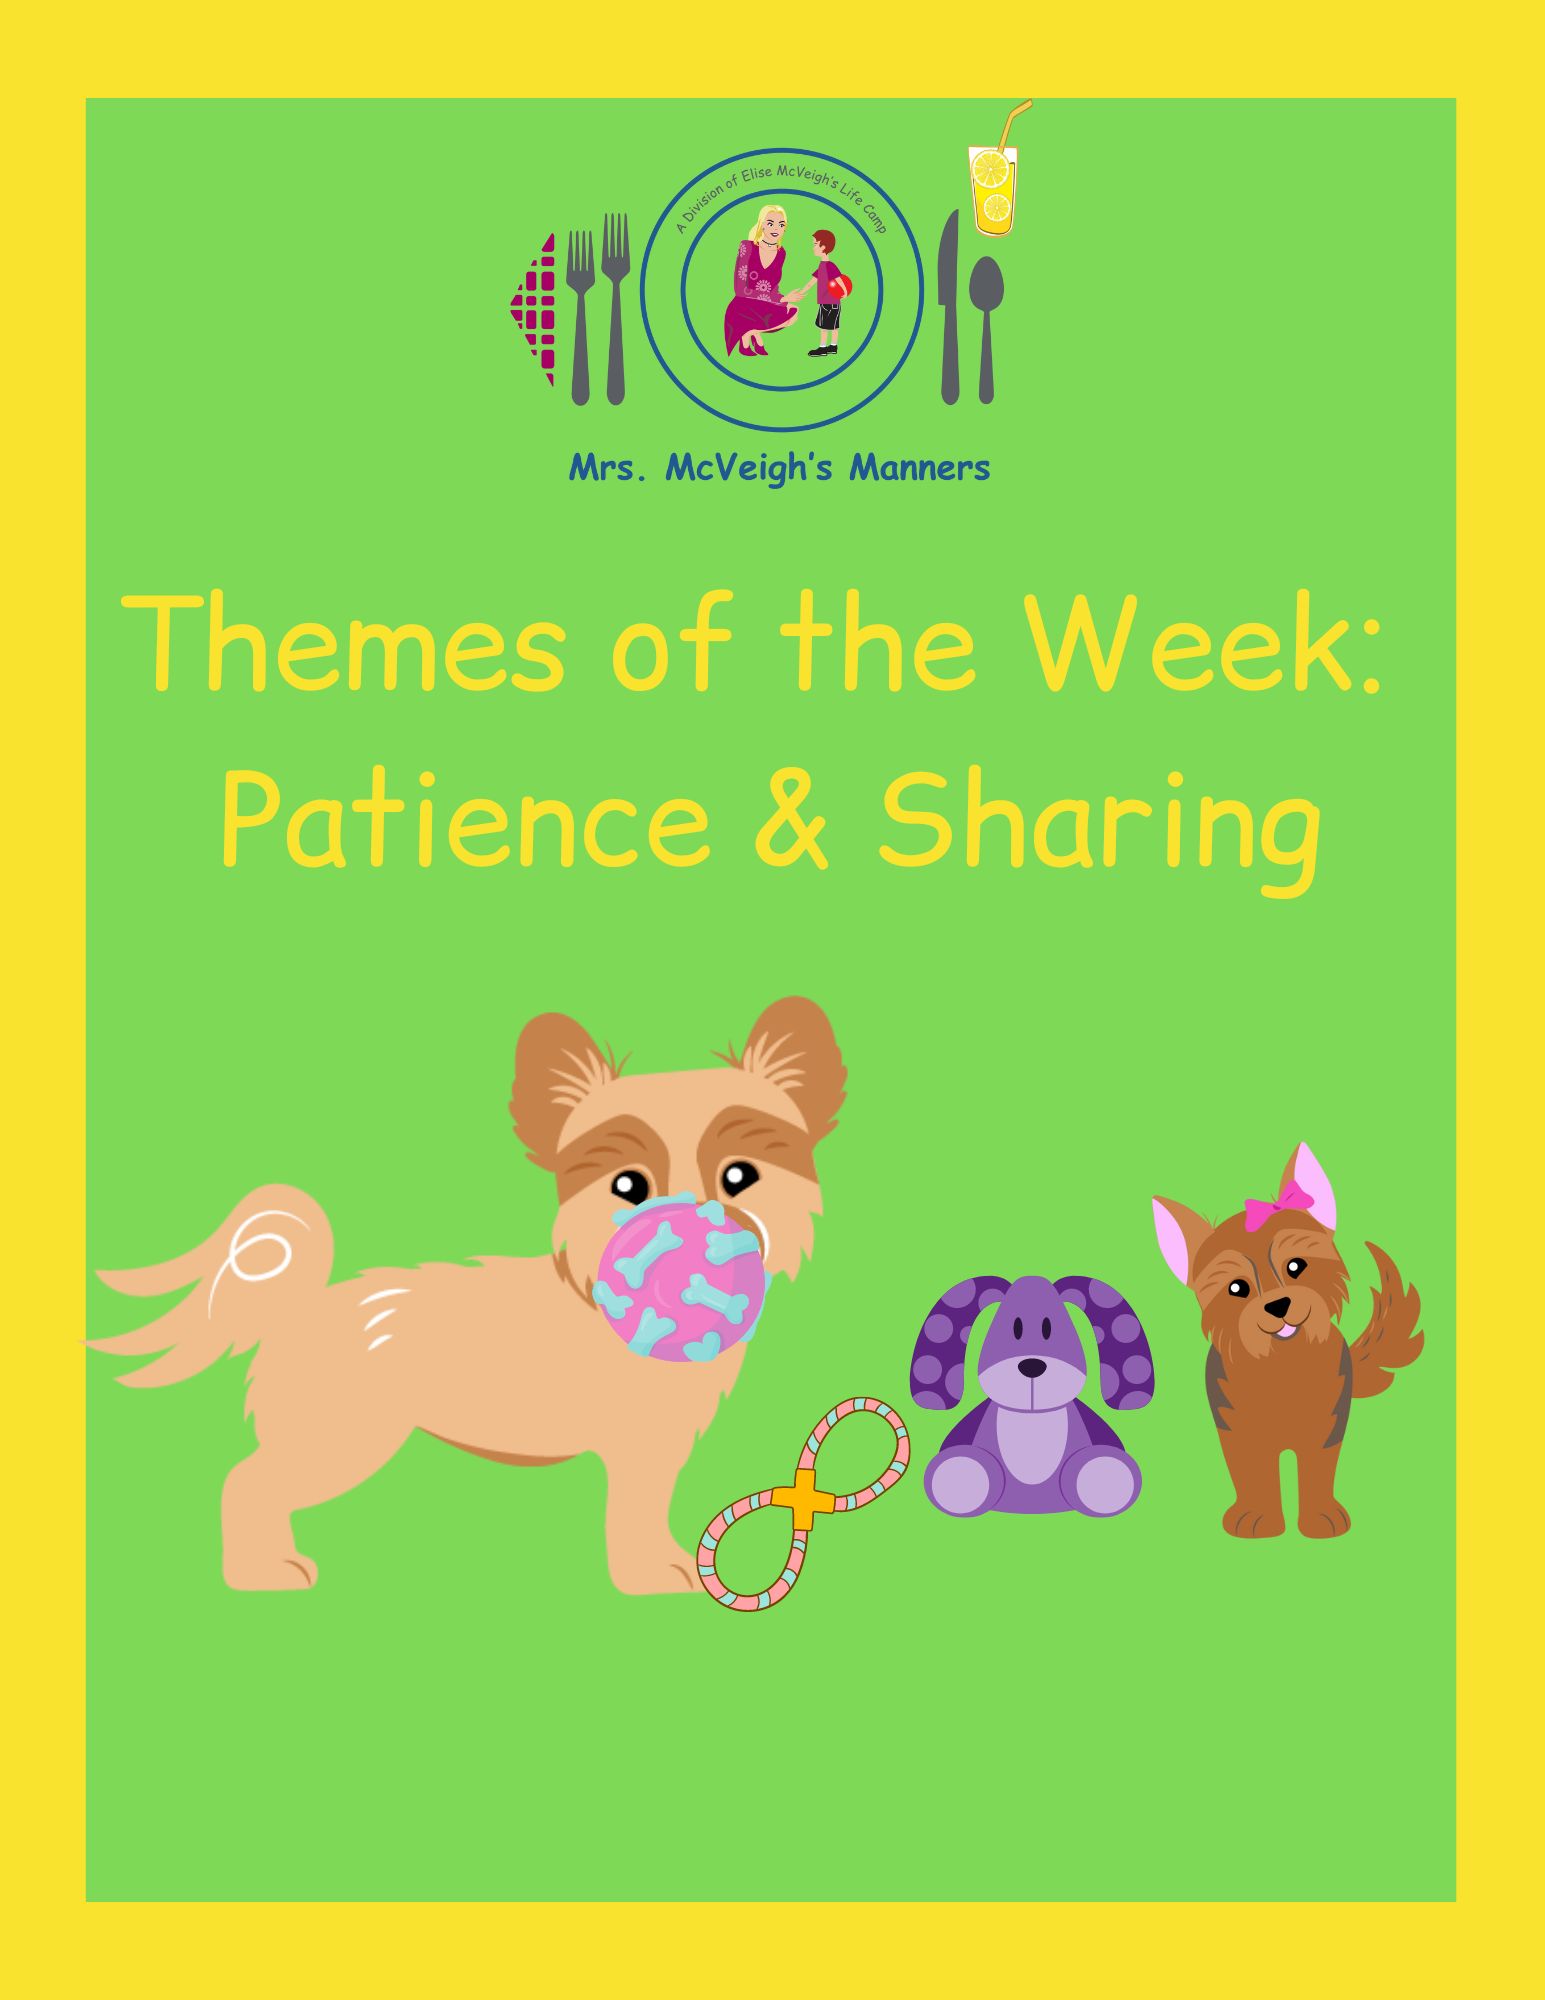 Patience & Sharing – Themes of the Week